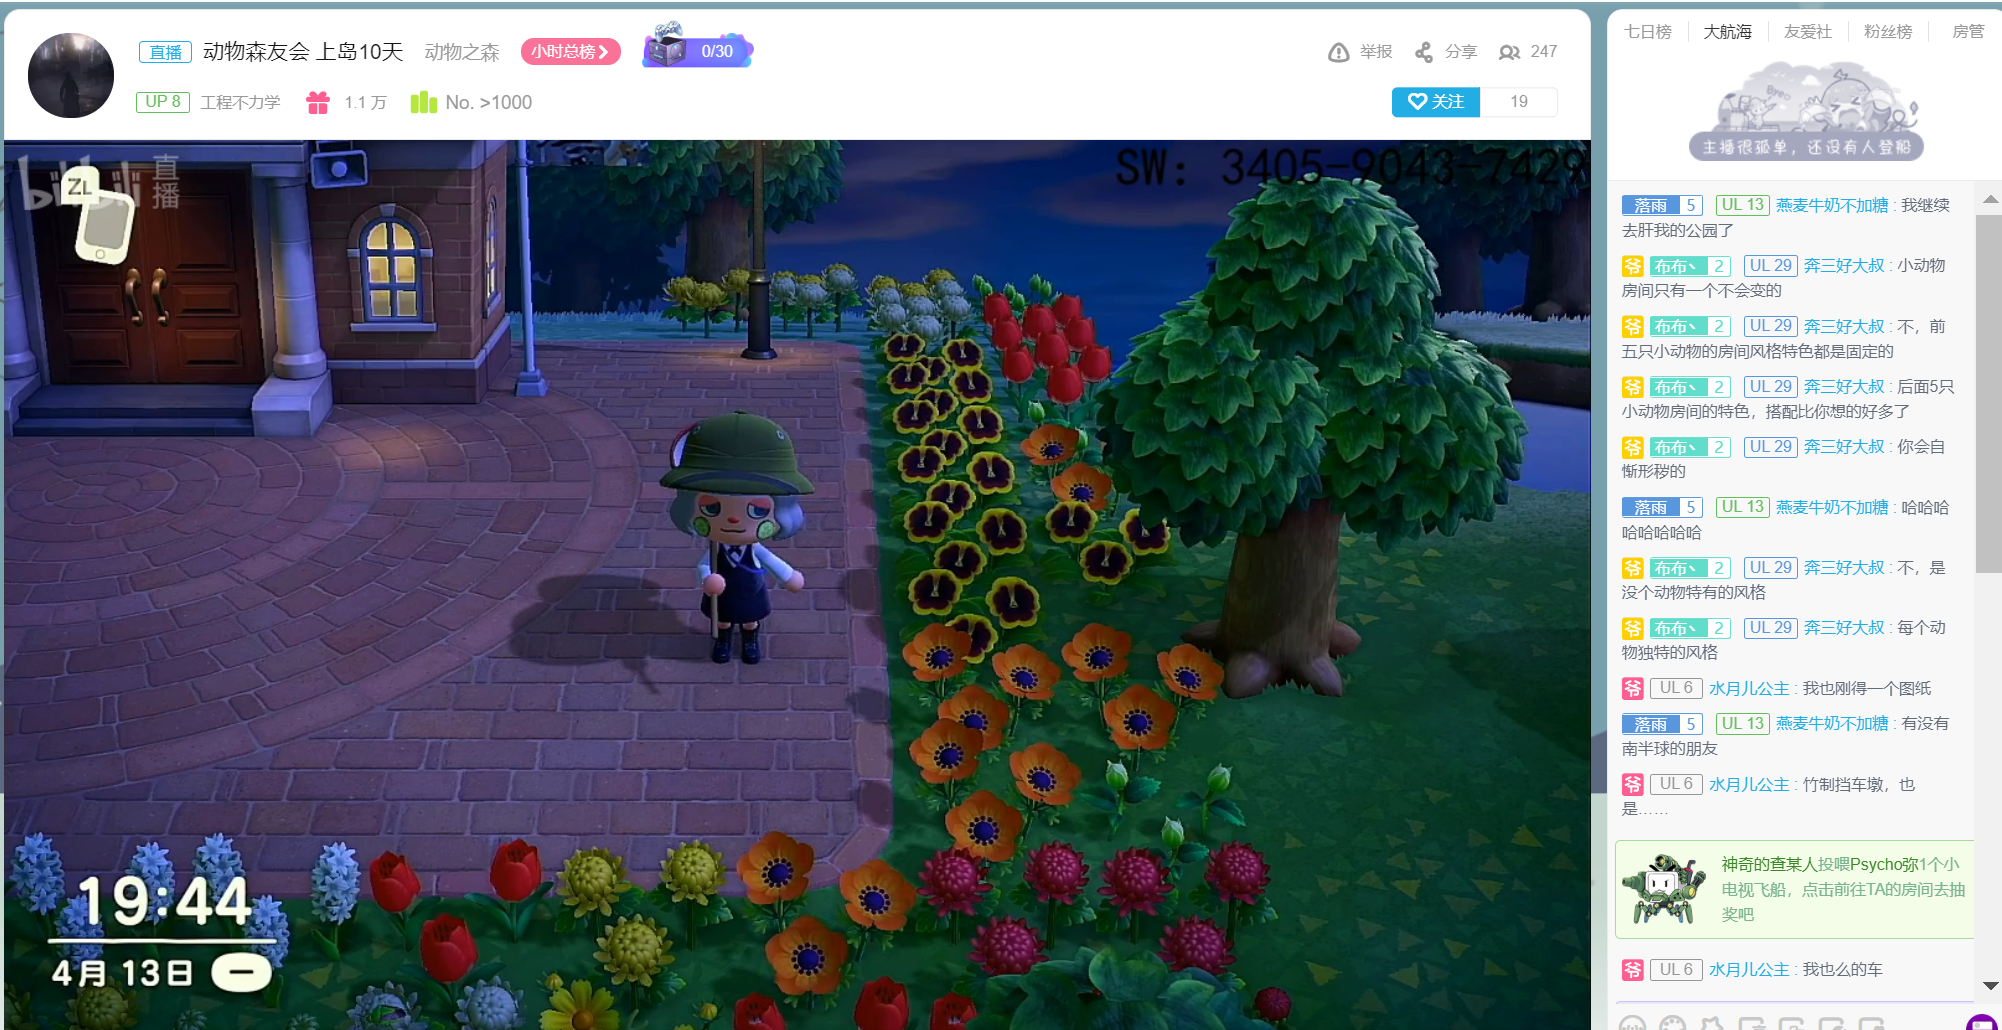 Despite word of a ban, on Monday a stream of Animal Crossing: New Horizons was still live on Bilibili, one of China’s most popular video platforms. (Picture: Bilibili)